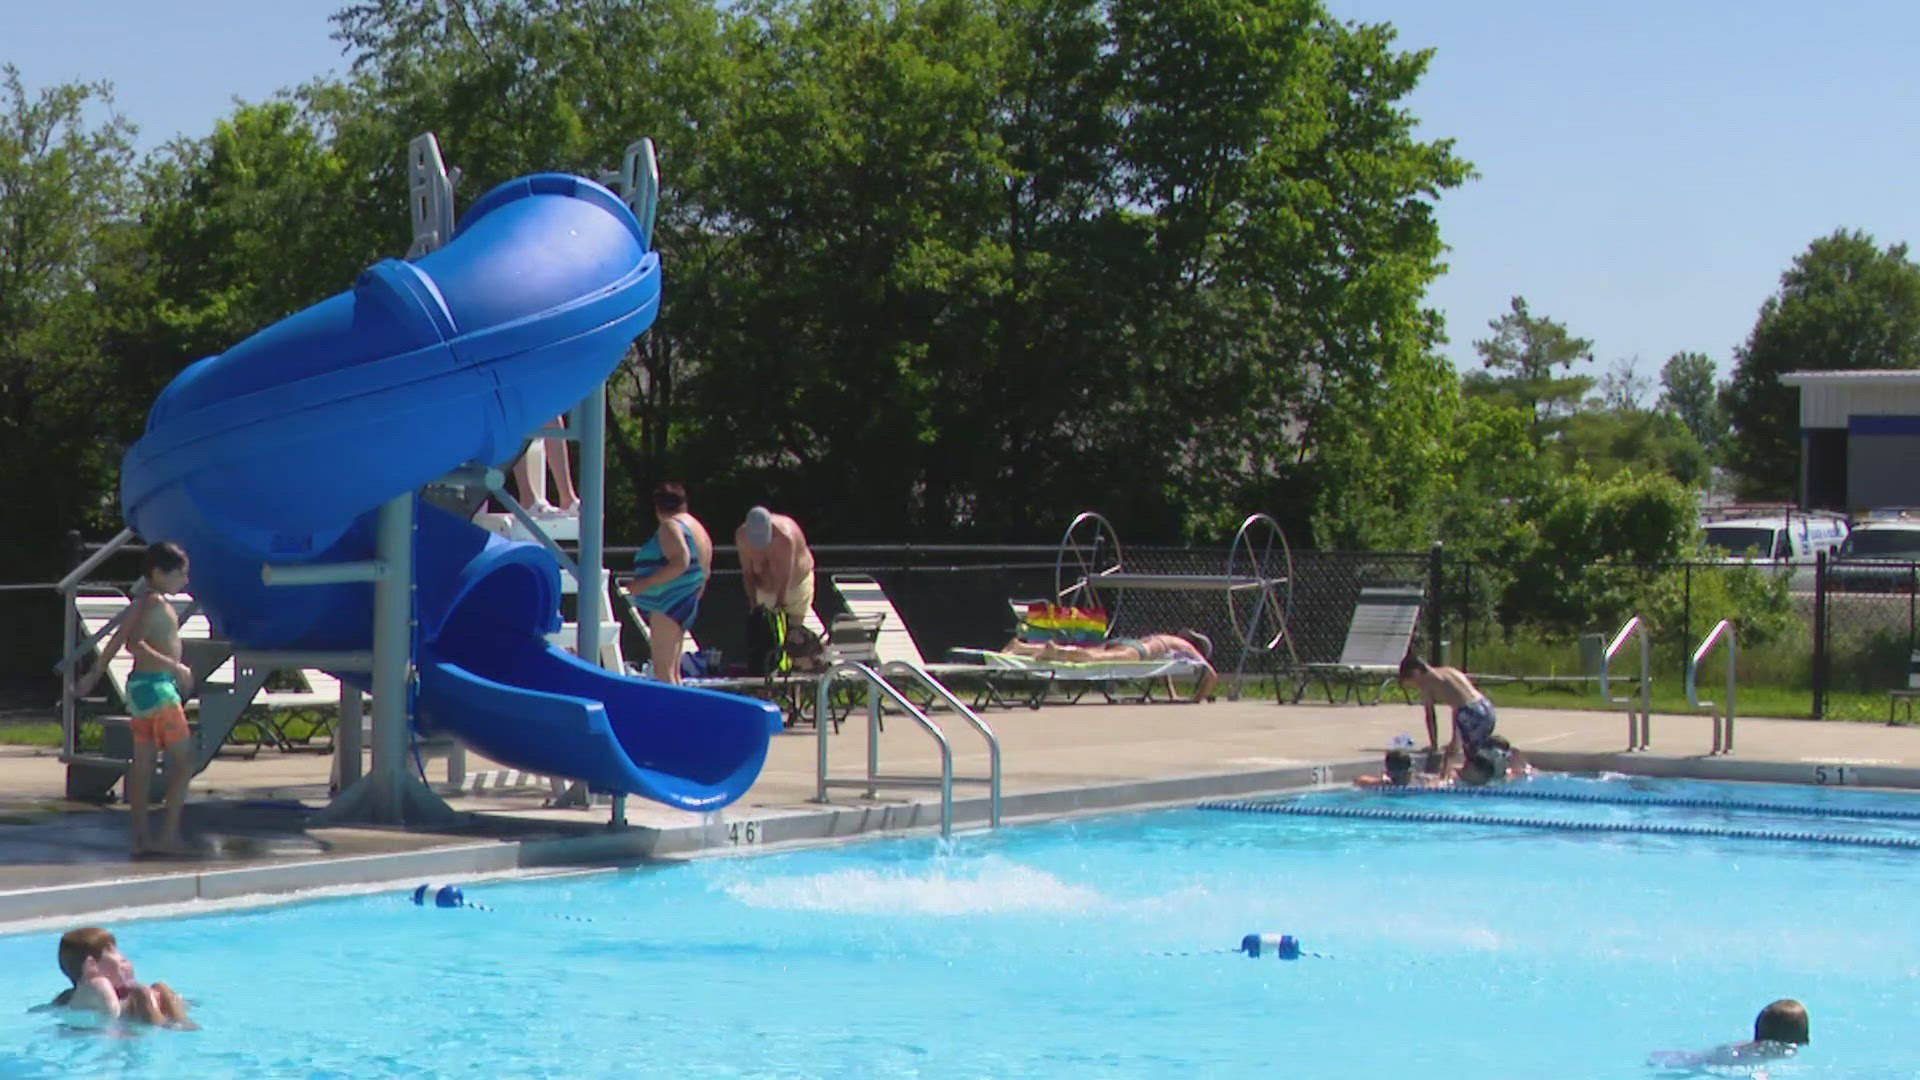 13News reporter Gina Glaros reports on why the YMCA of Greater Indianapolis is putting on free community pool day.